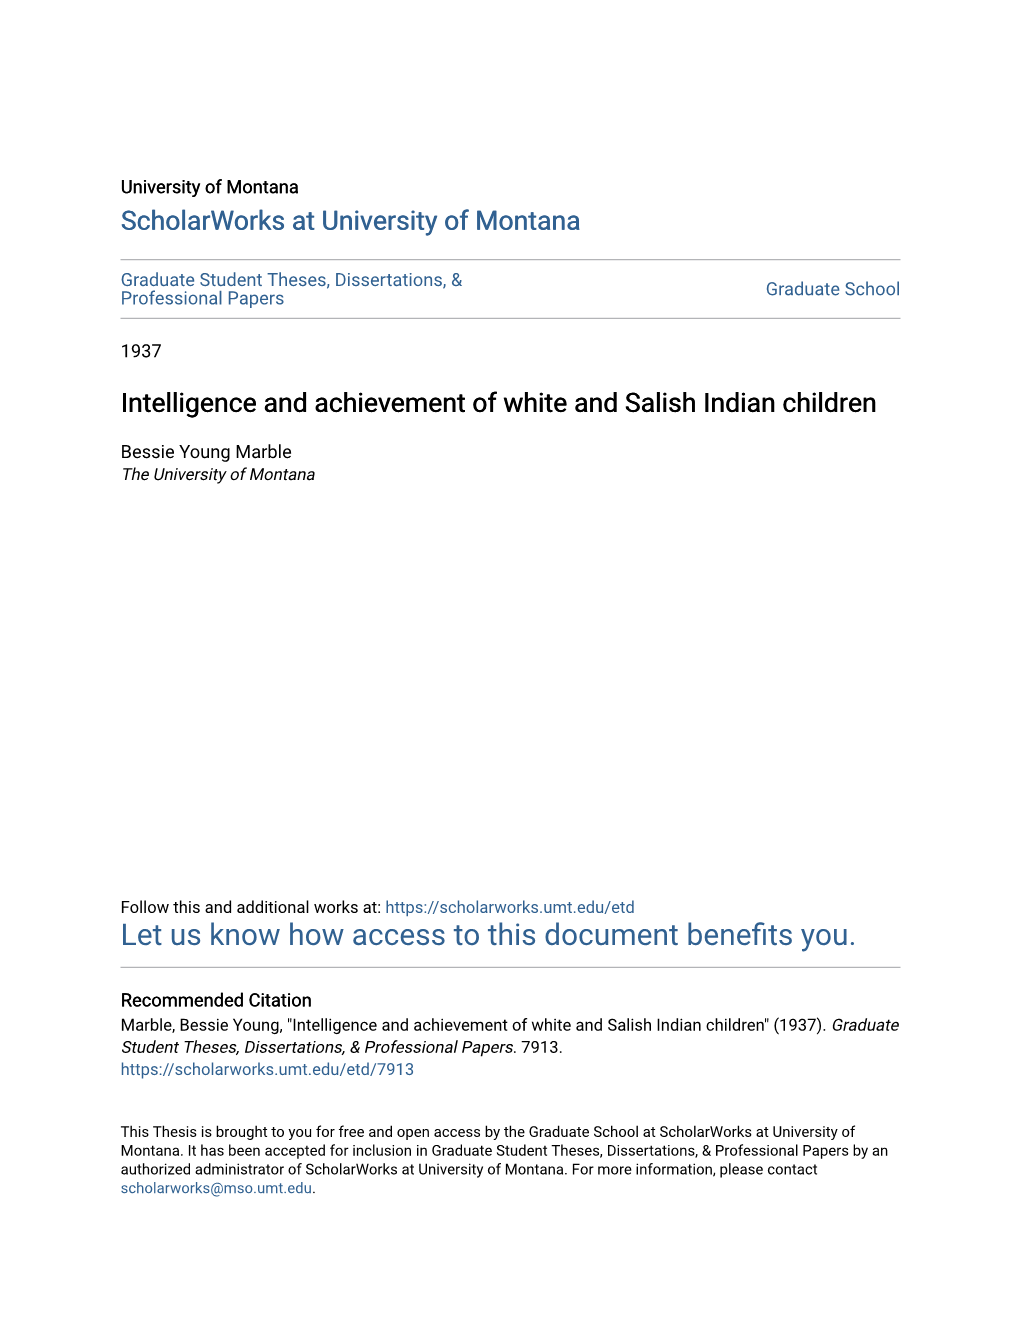 Intelligence and Achievement of White and Salish Indian Children